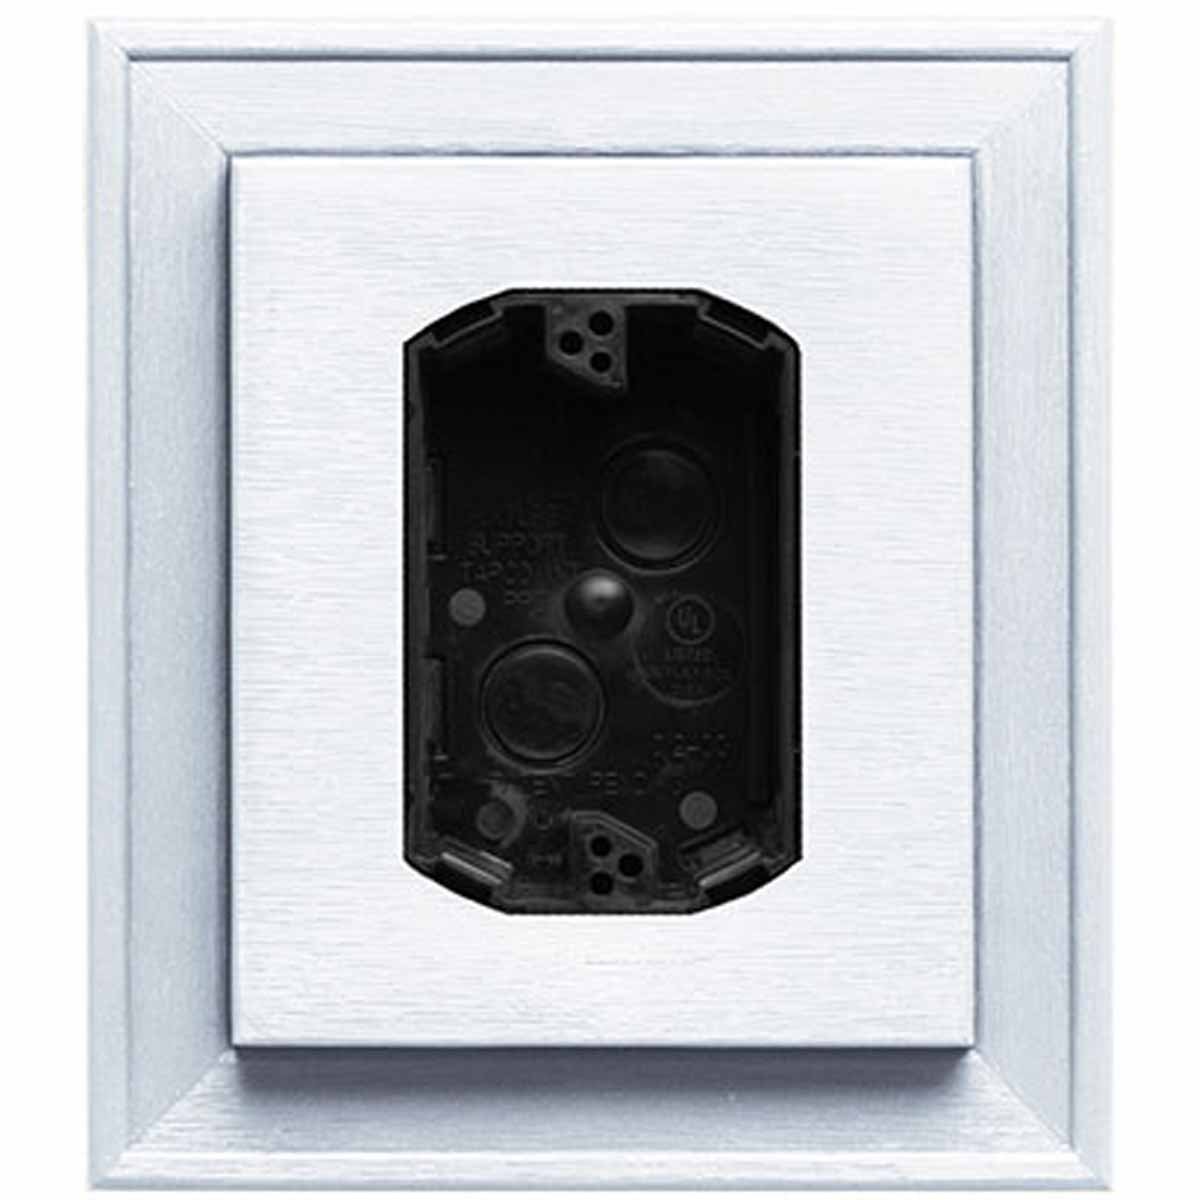 2 Pack Mid-America Mount Master Electrical Block 7"x8" 117 Bright White 